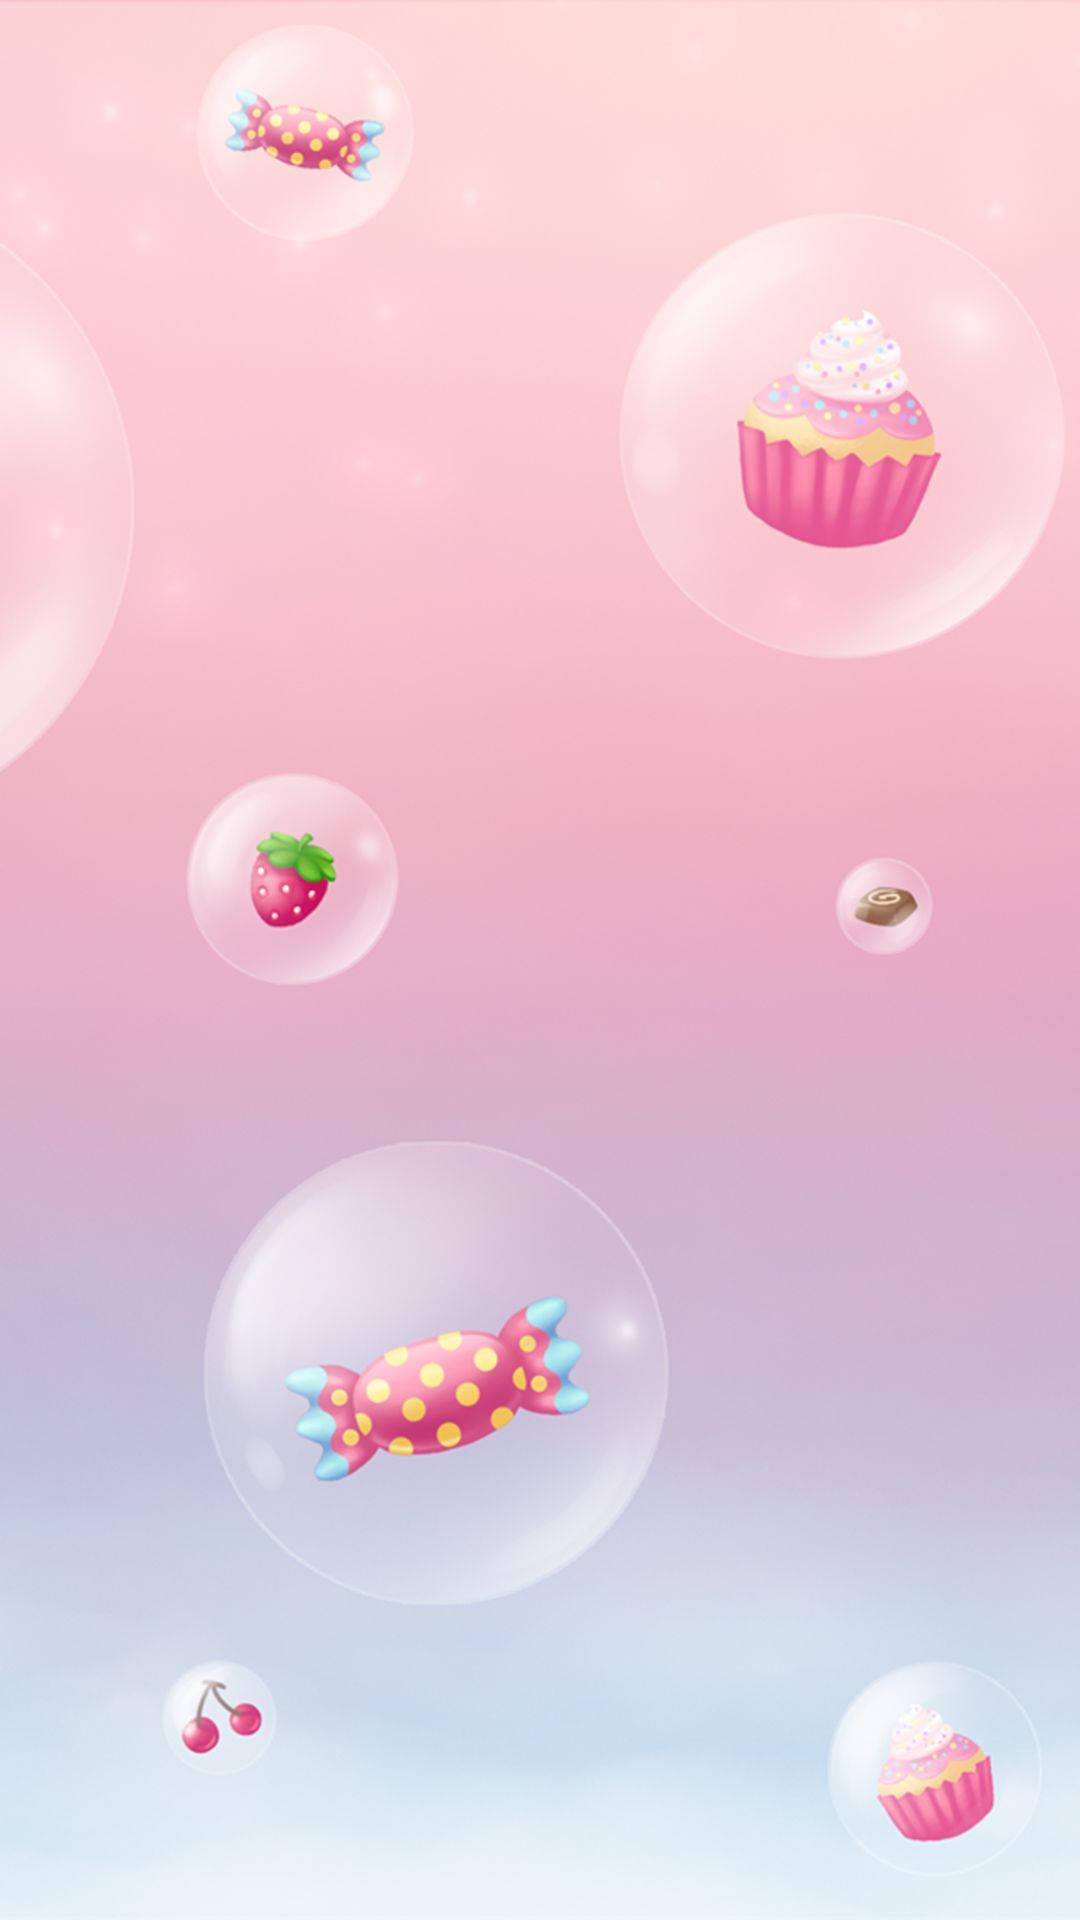 Adorable Sweet Treats Illustration for iPhone Wallpaper